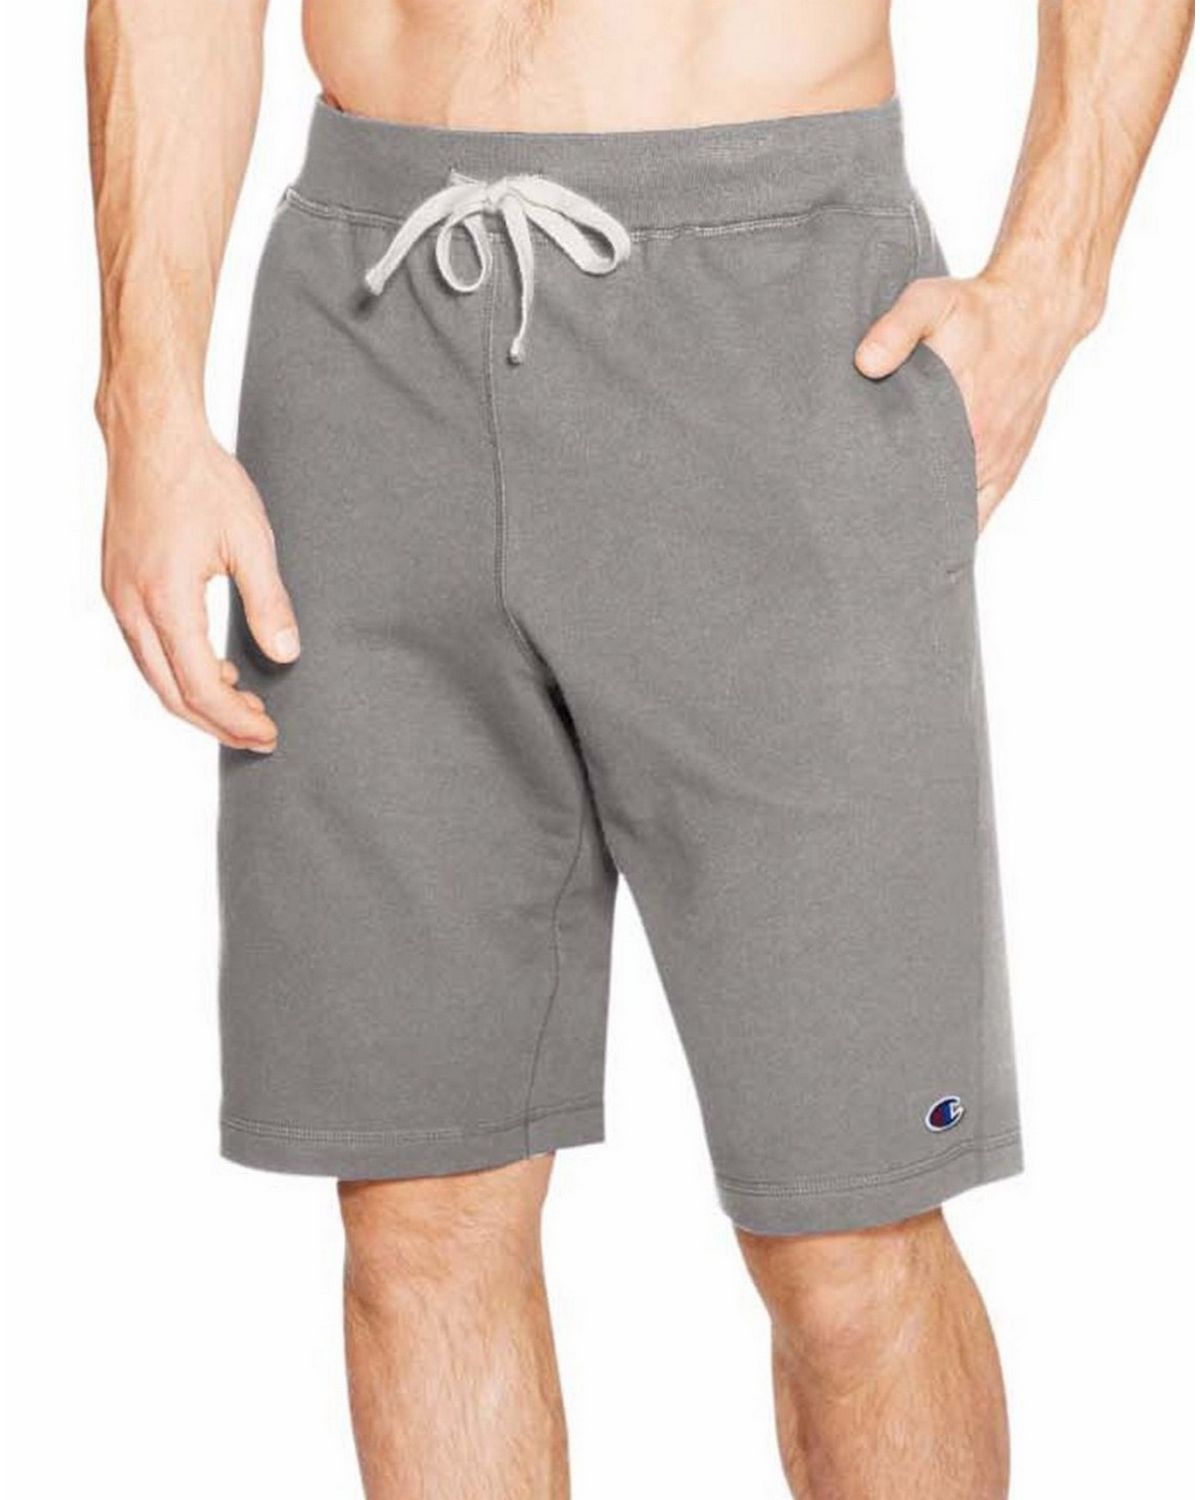 Good Brief Men's French Terry Shorts 